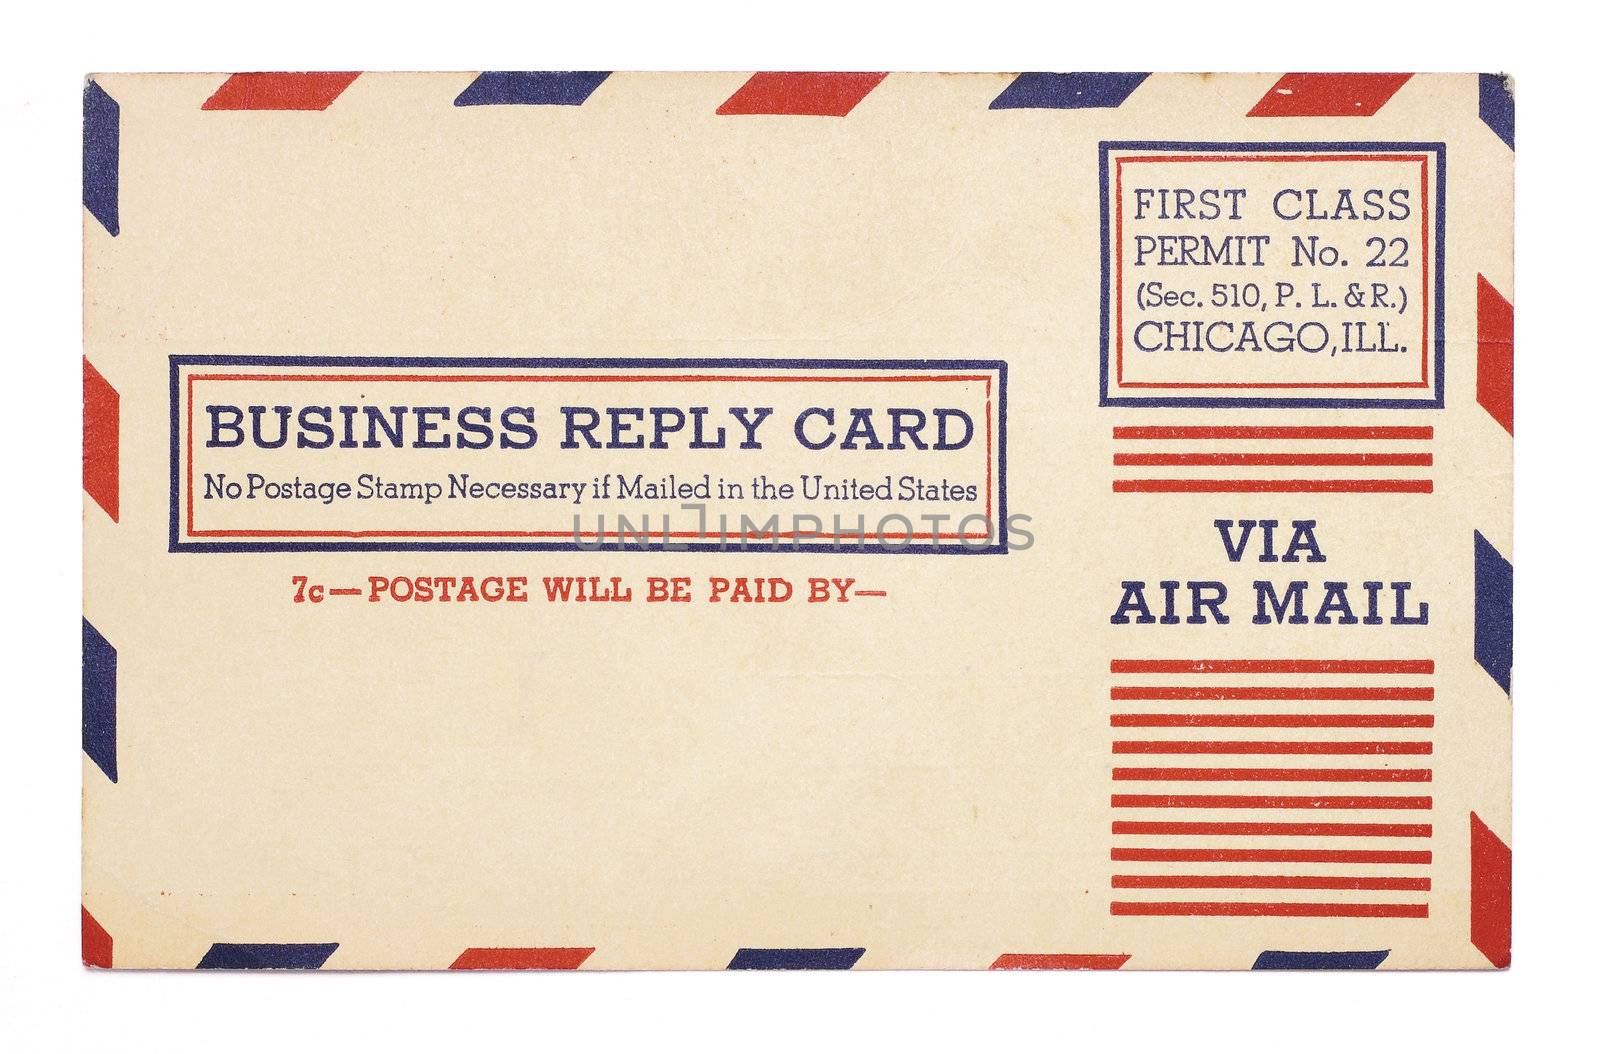 A vintage United States first class, airmail business reply card with red and blue stripes around border.